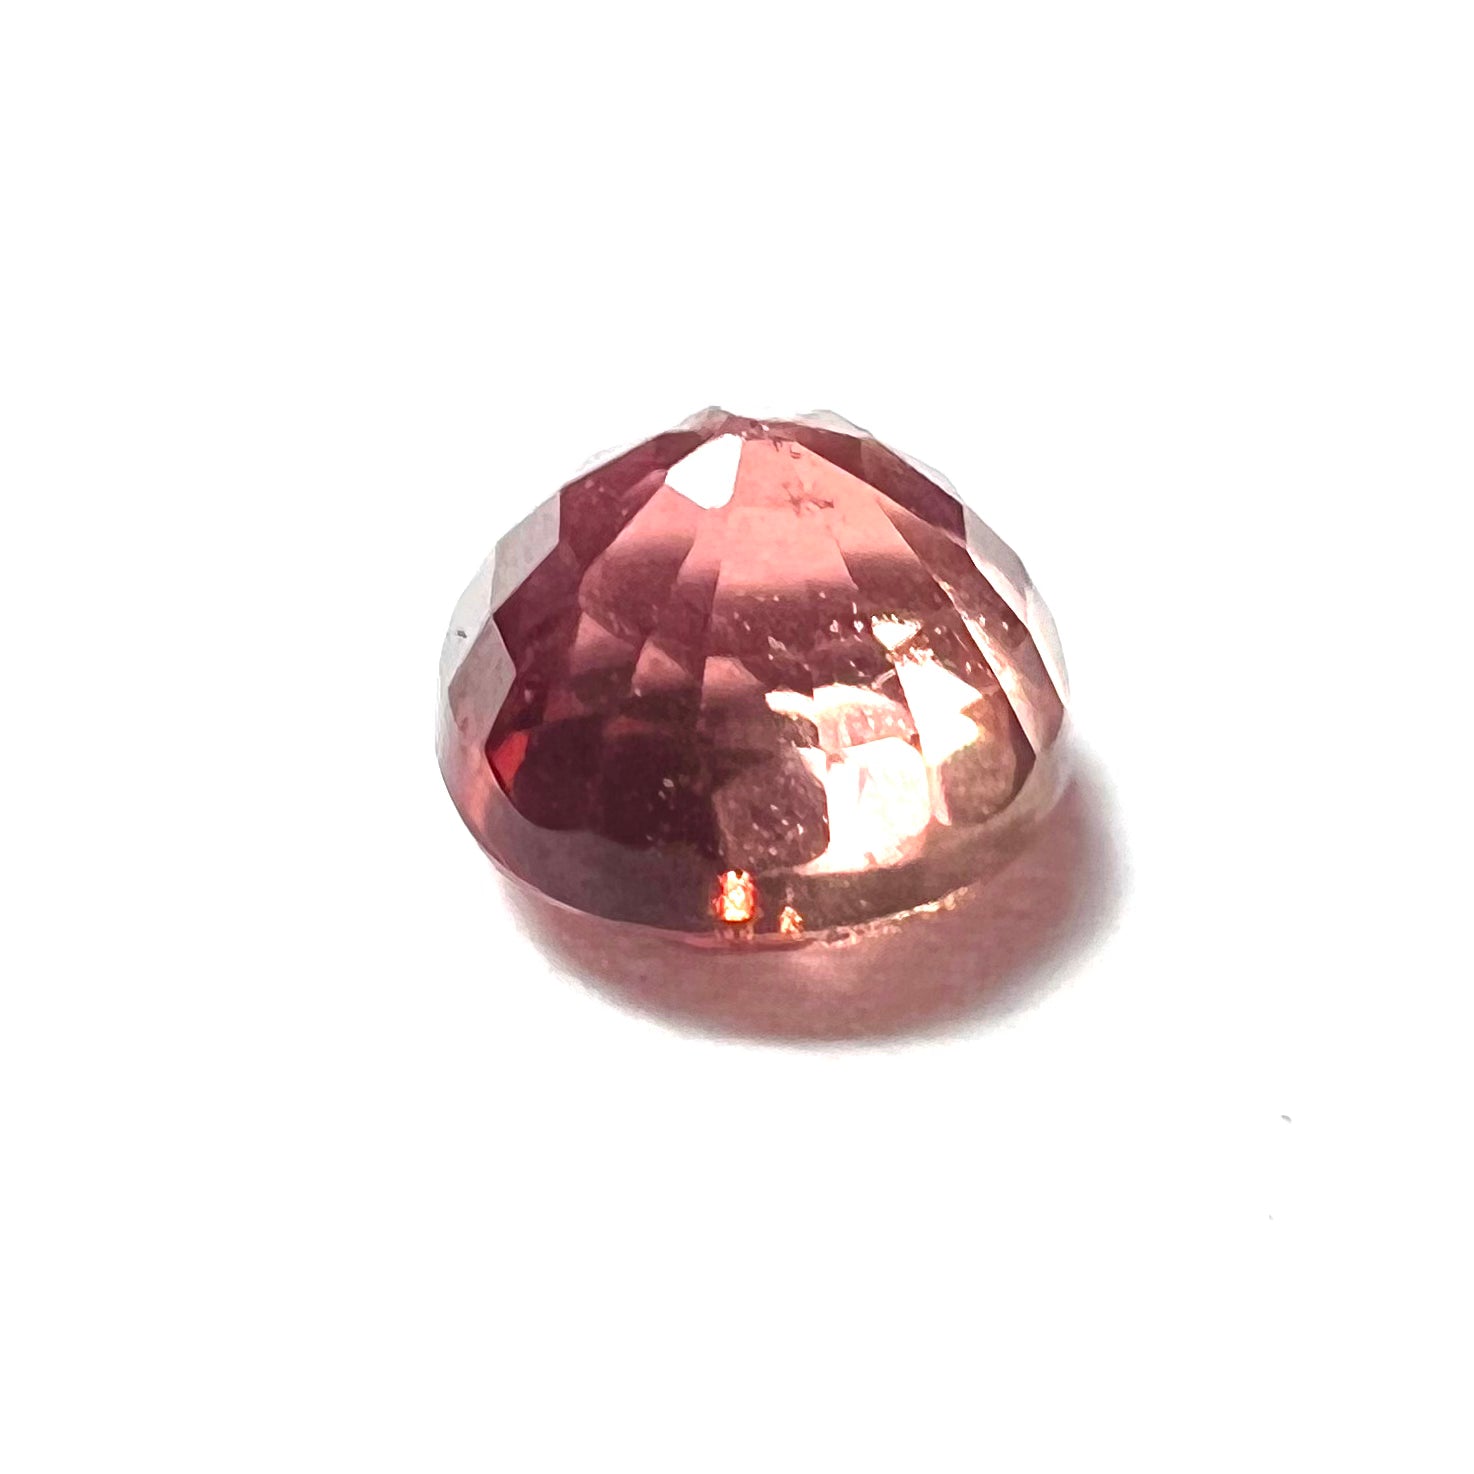 .33CT Loose Round Red Sapphire 3.5x2.5mm Earth mined Gemstone